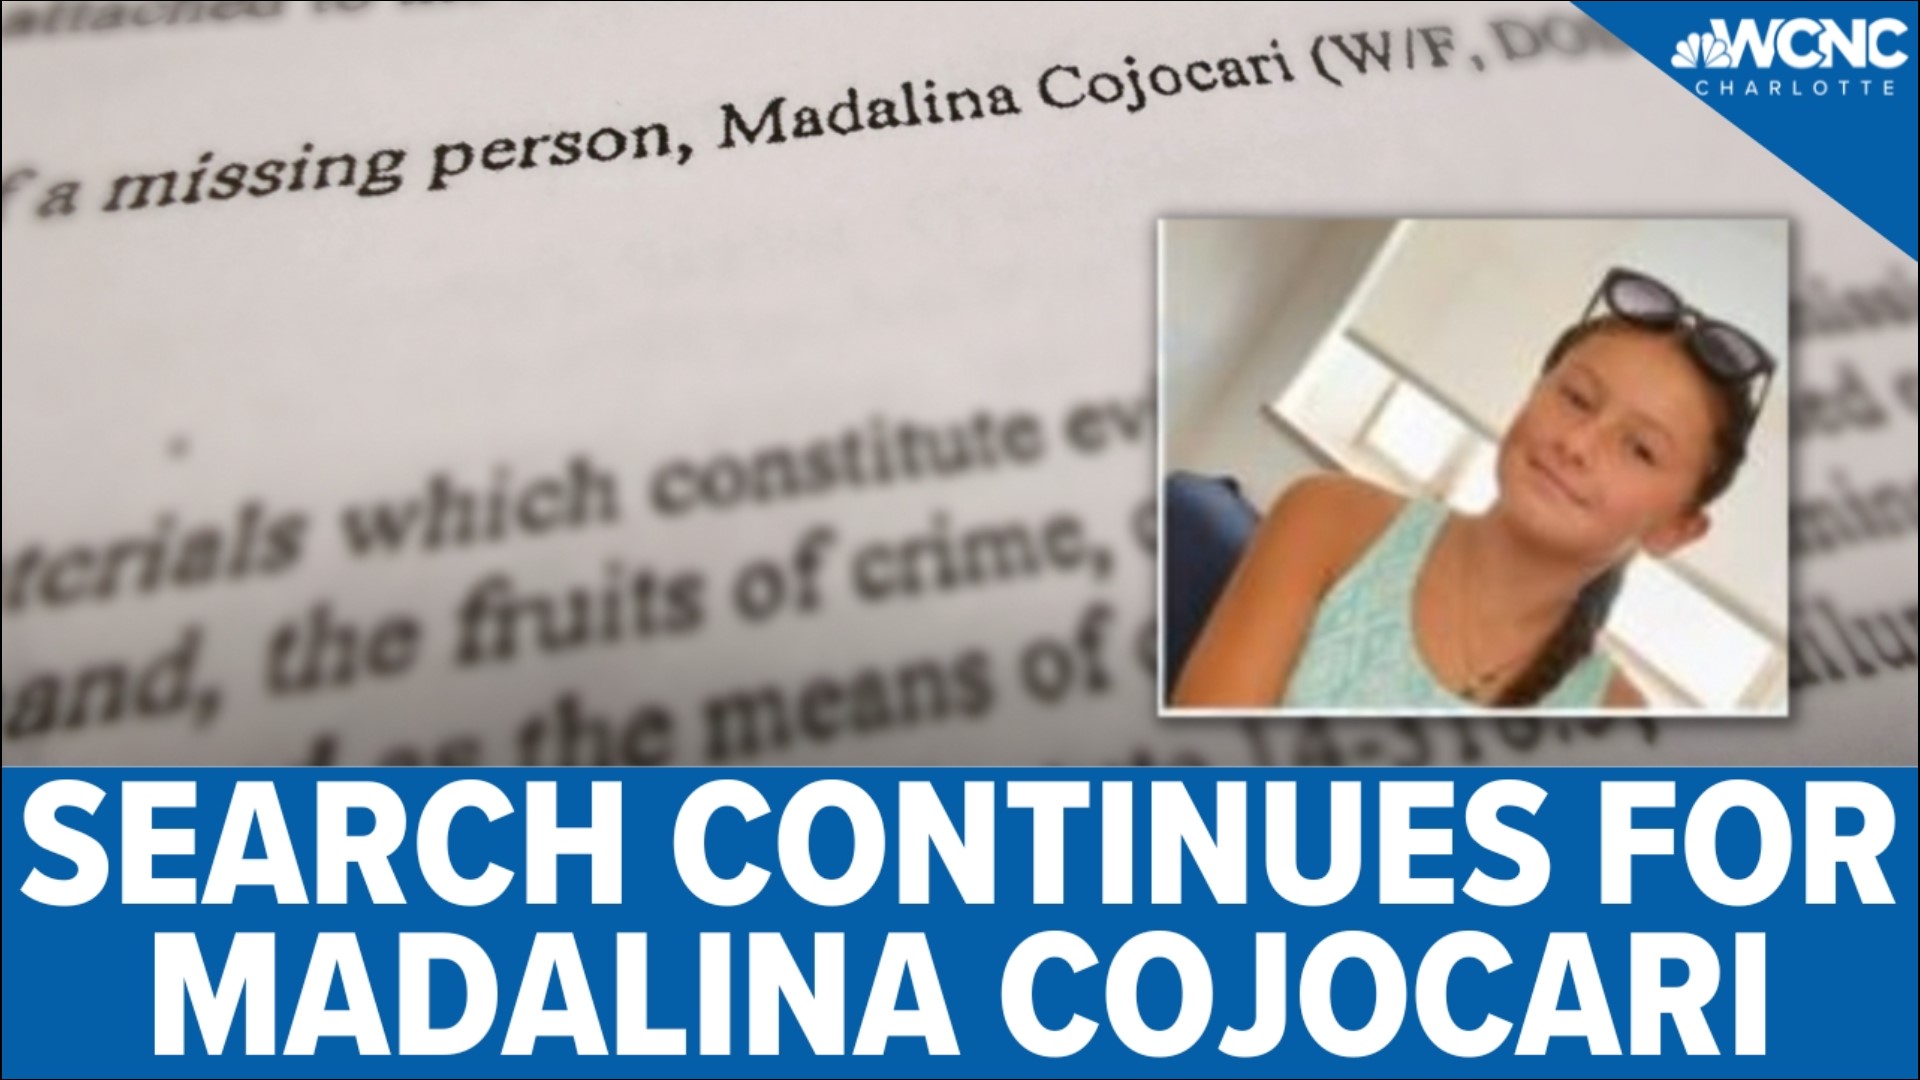 The search for Madalina Cojocari continues on today's three month mark since the 11 year old was last seen publicly.